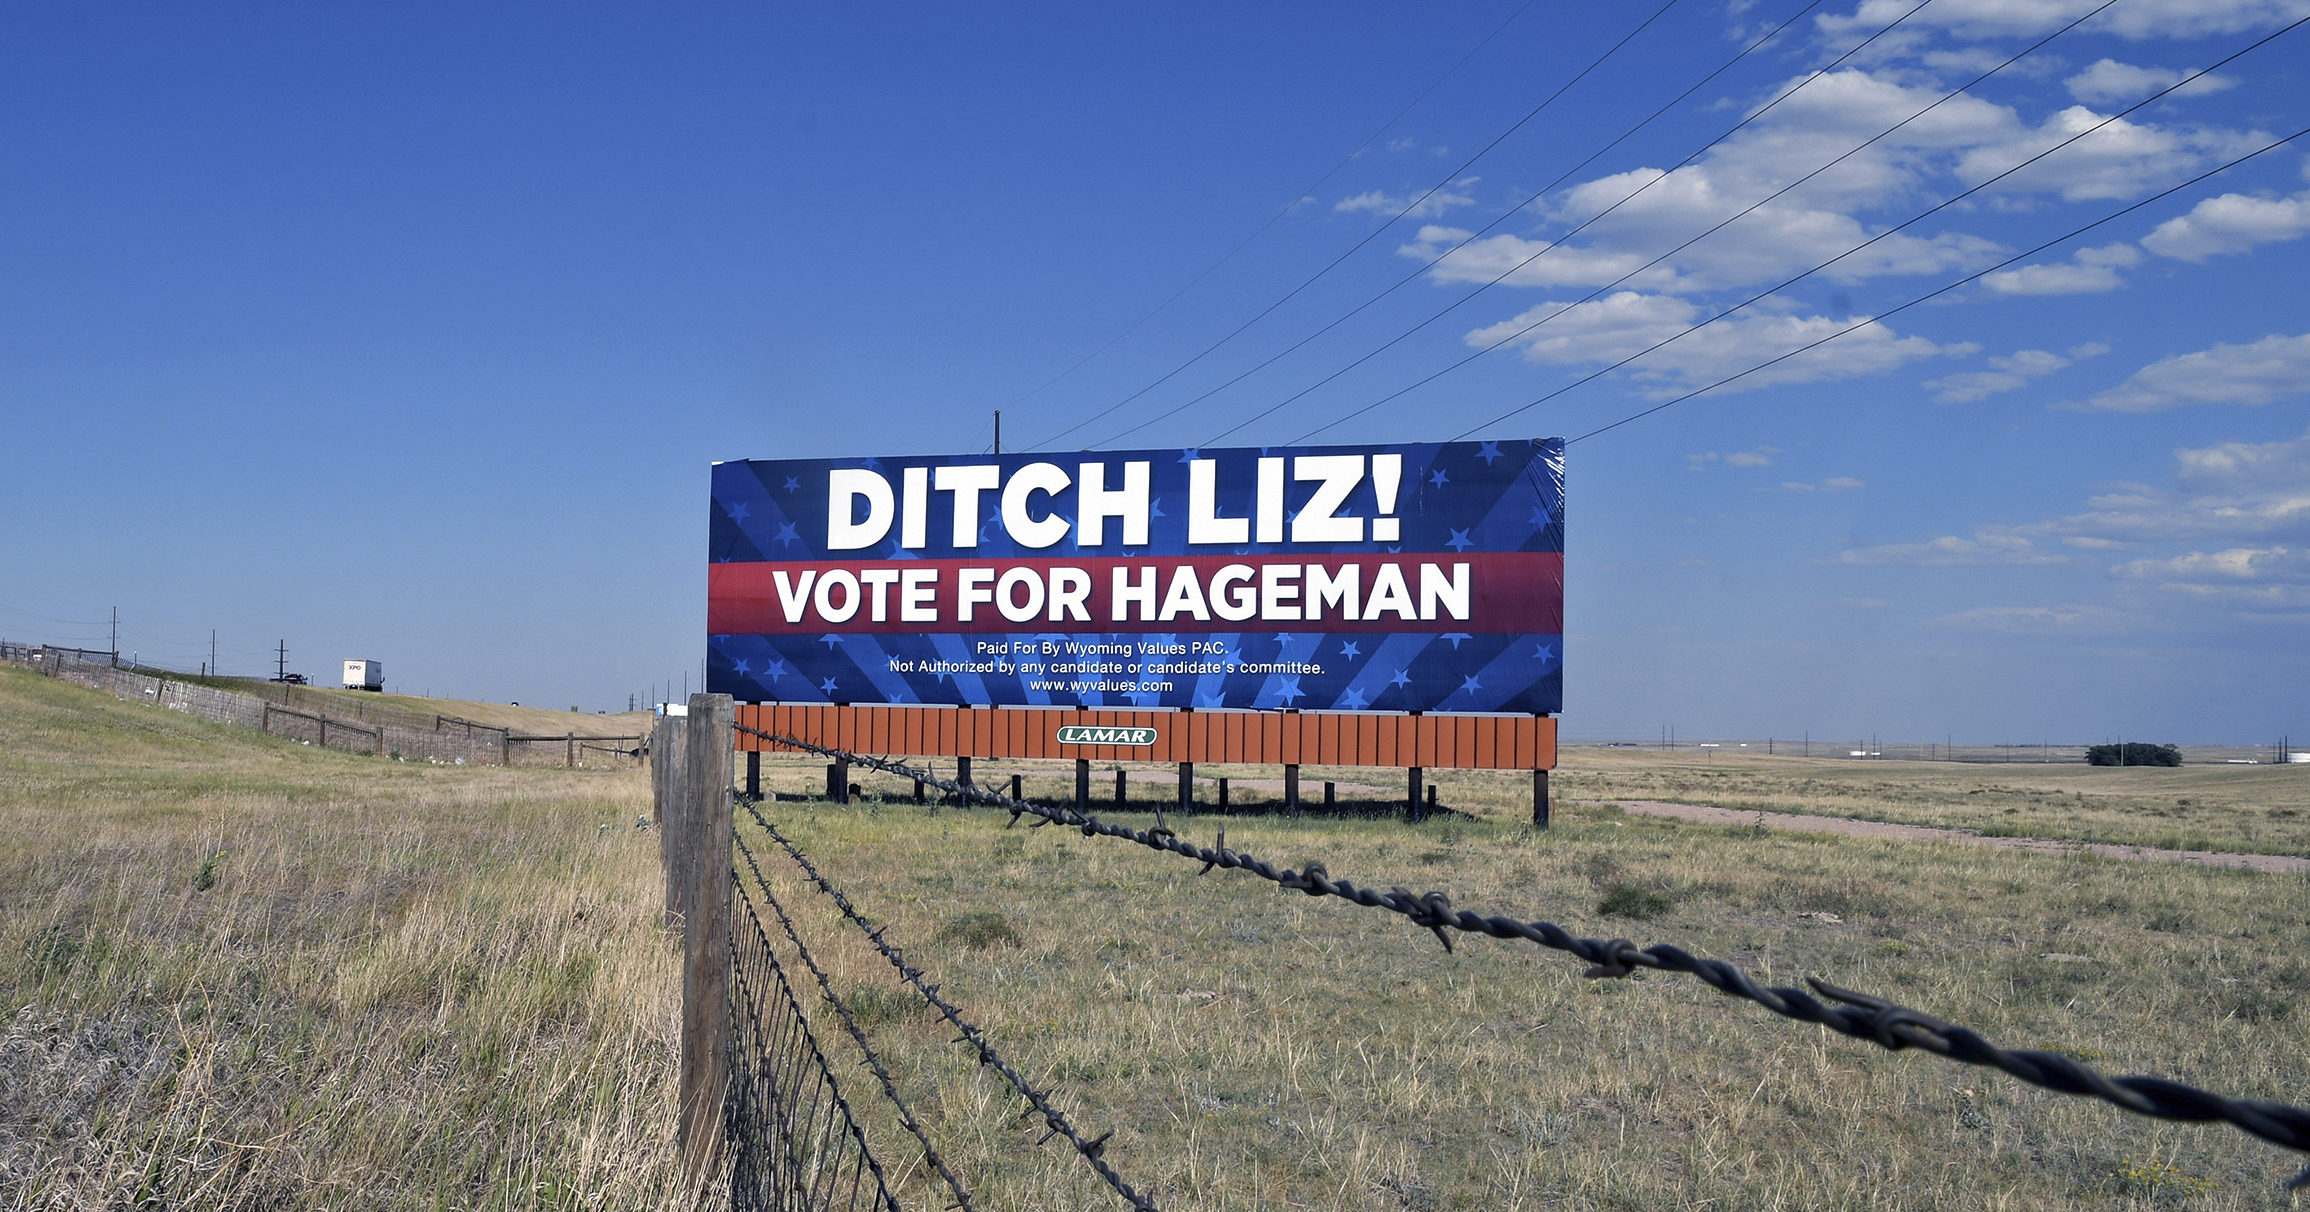 A billboard outside Cheyenne, Wyoming, calls on voters to cast their ballots for Harriet Hageman, who is running against incumbent Rep. Liz Cheney in the Republican primary election.